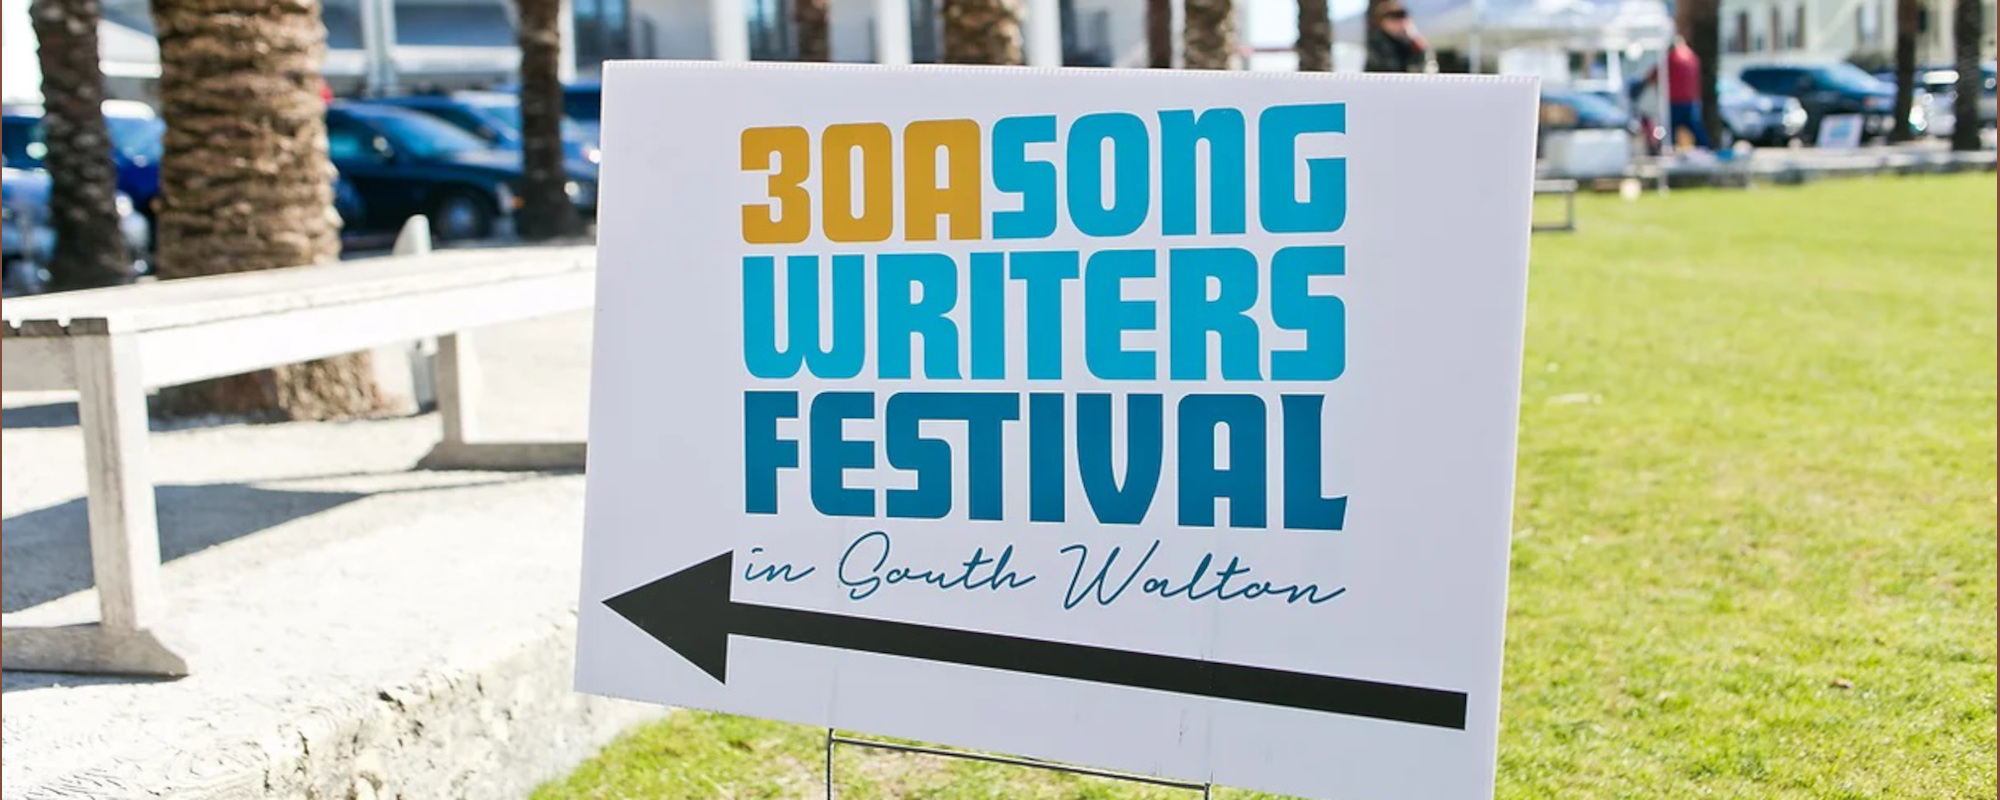 10 Reasons to Get Your Tickets Now to the 2023 30A Songwriters Festival